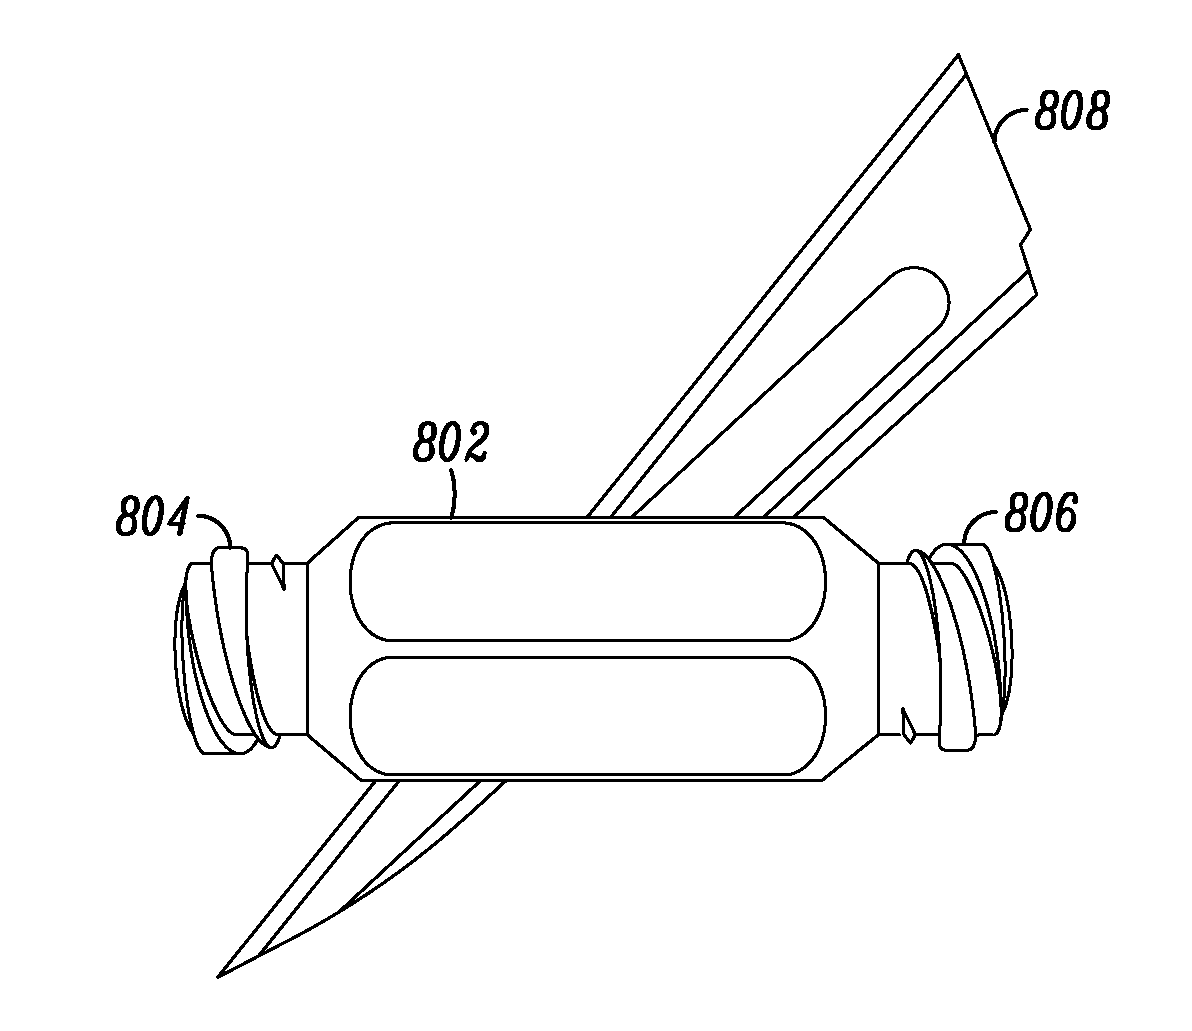 Device for rendering injectable dermis